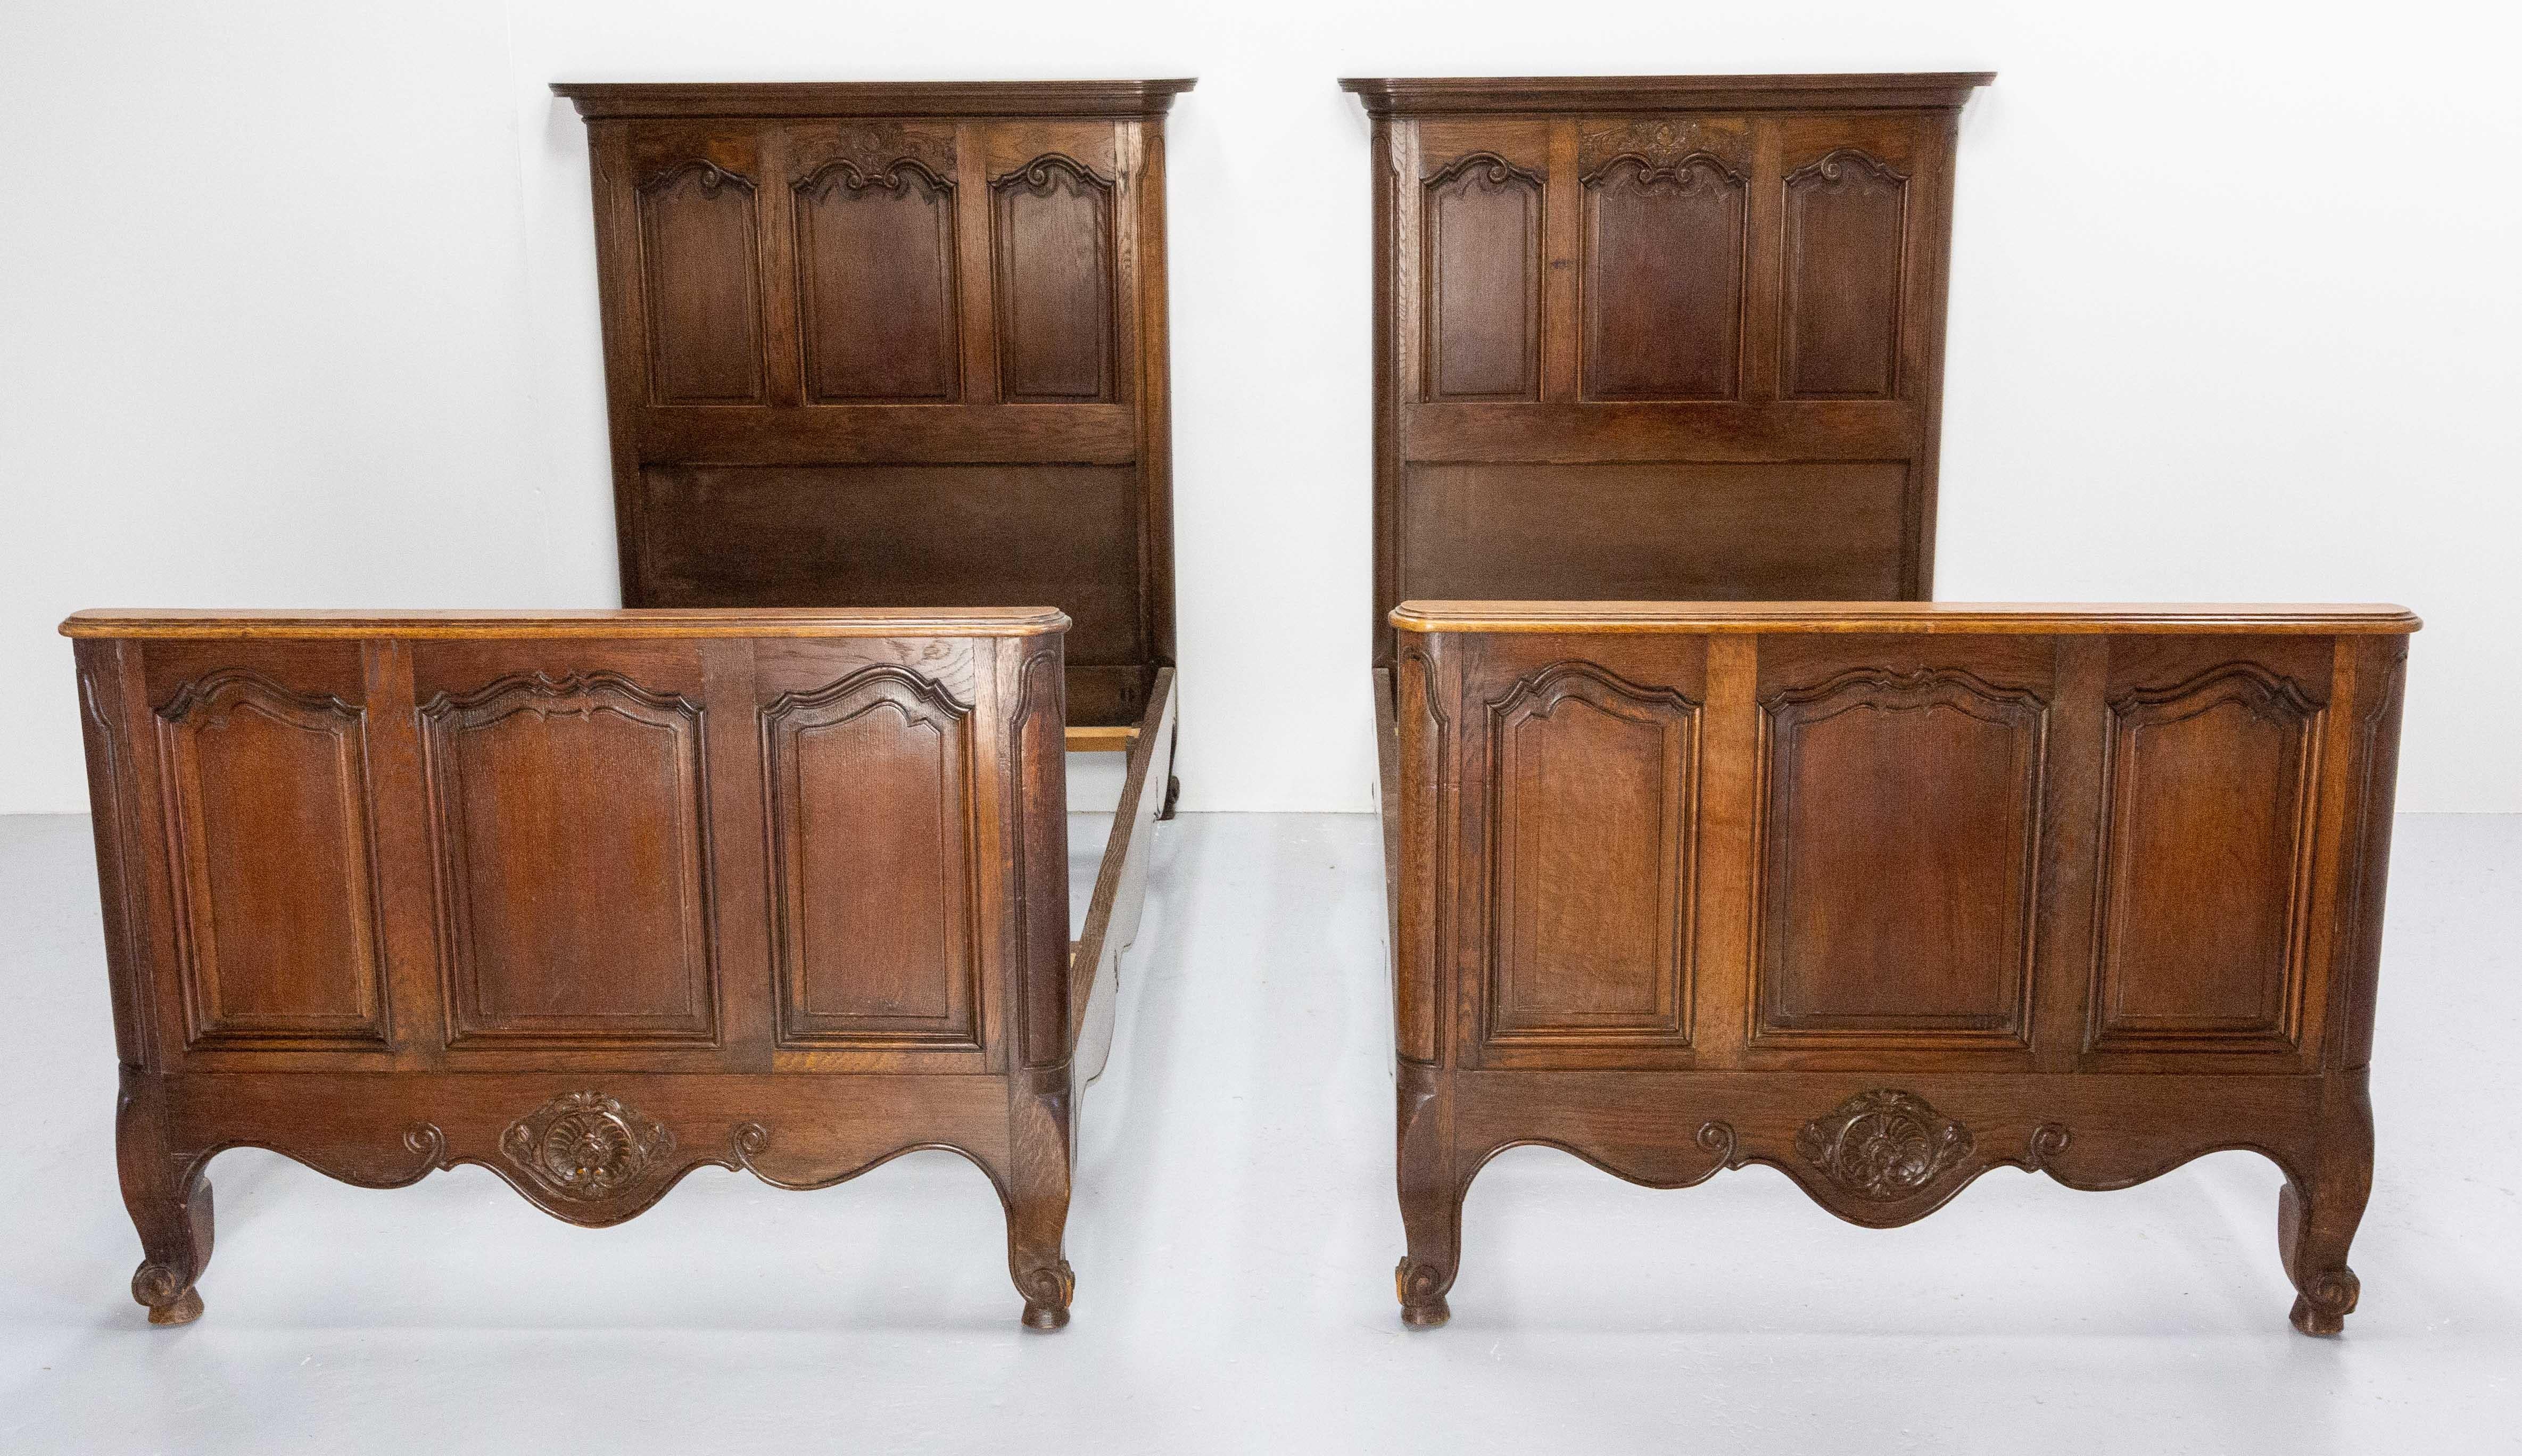 French twin beds in the Louis XV style : carved vegetable shells and decorations on the heads and the foots of the beds
Massive oak, made in the 20th mid-century
Dimension for the bedding: 
74.80 x 36.22 in. (190 x 92 cm)
Good vintage condition